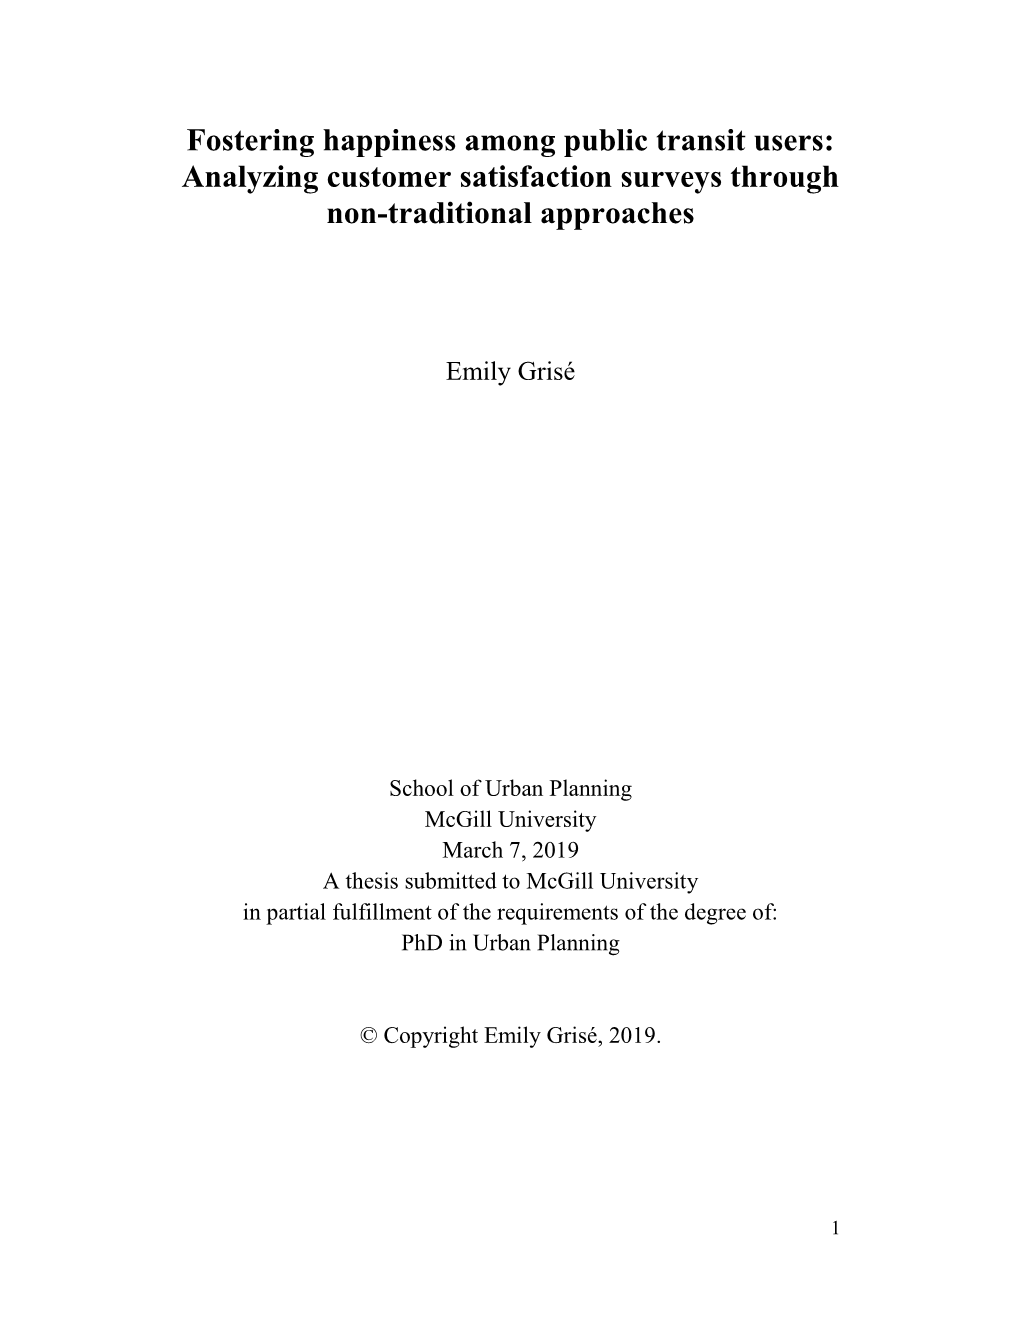 Fostering Happiness Among Public Transit Users: Analyzing Customer Satisfaction Surveys Through Non-Traditional Approaches